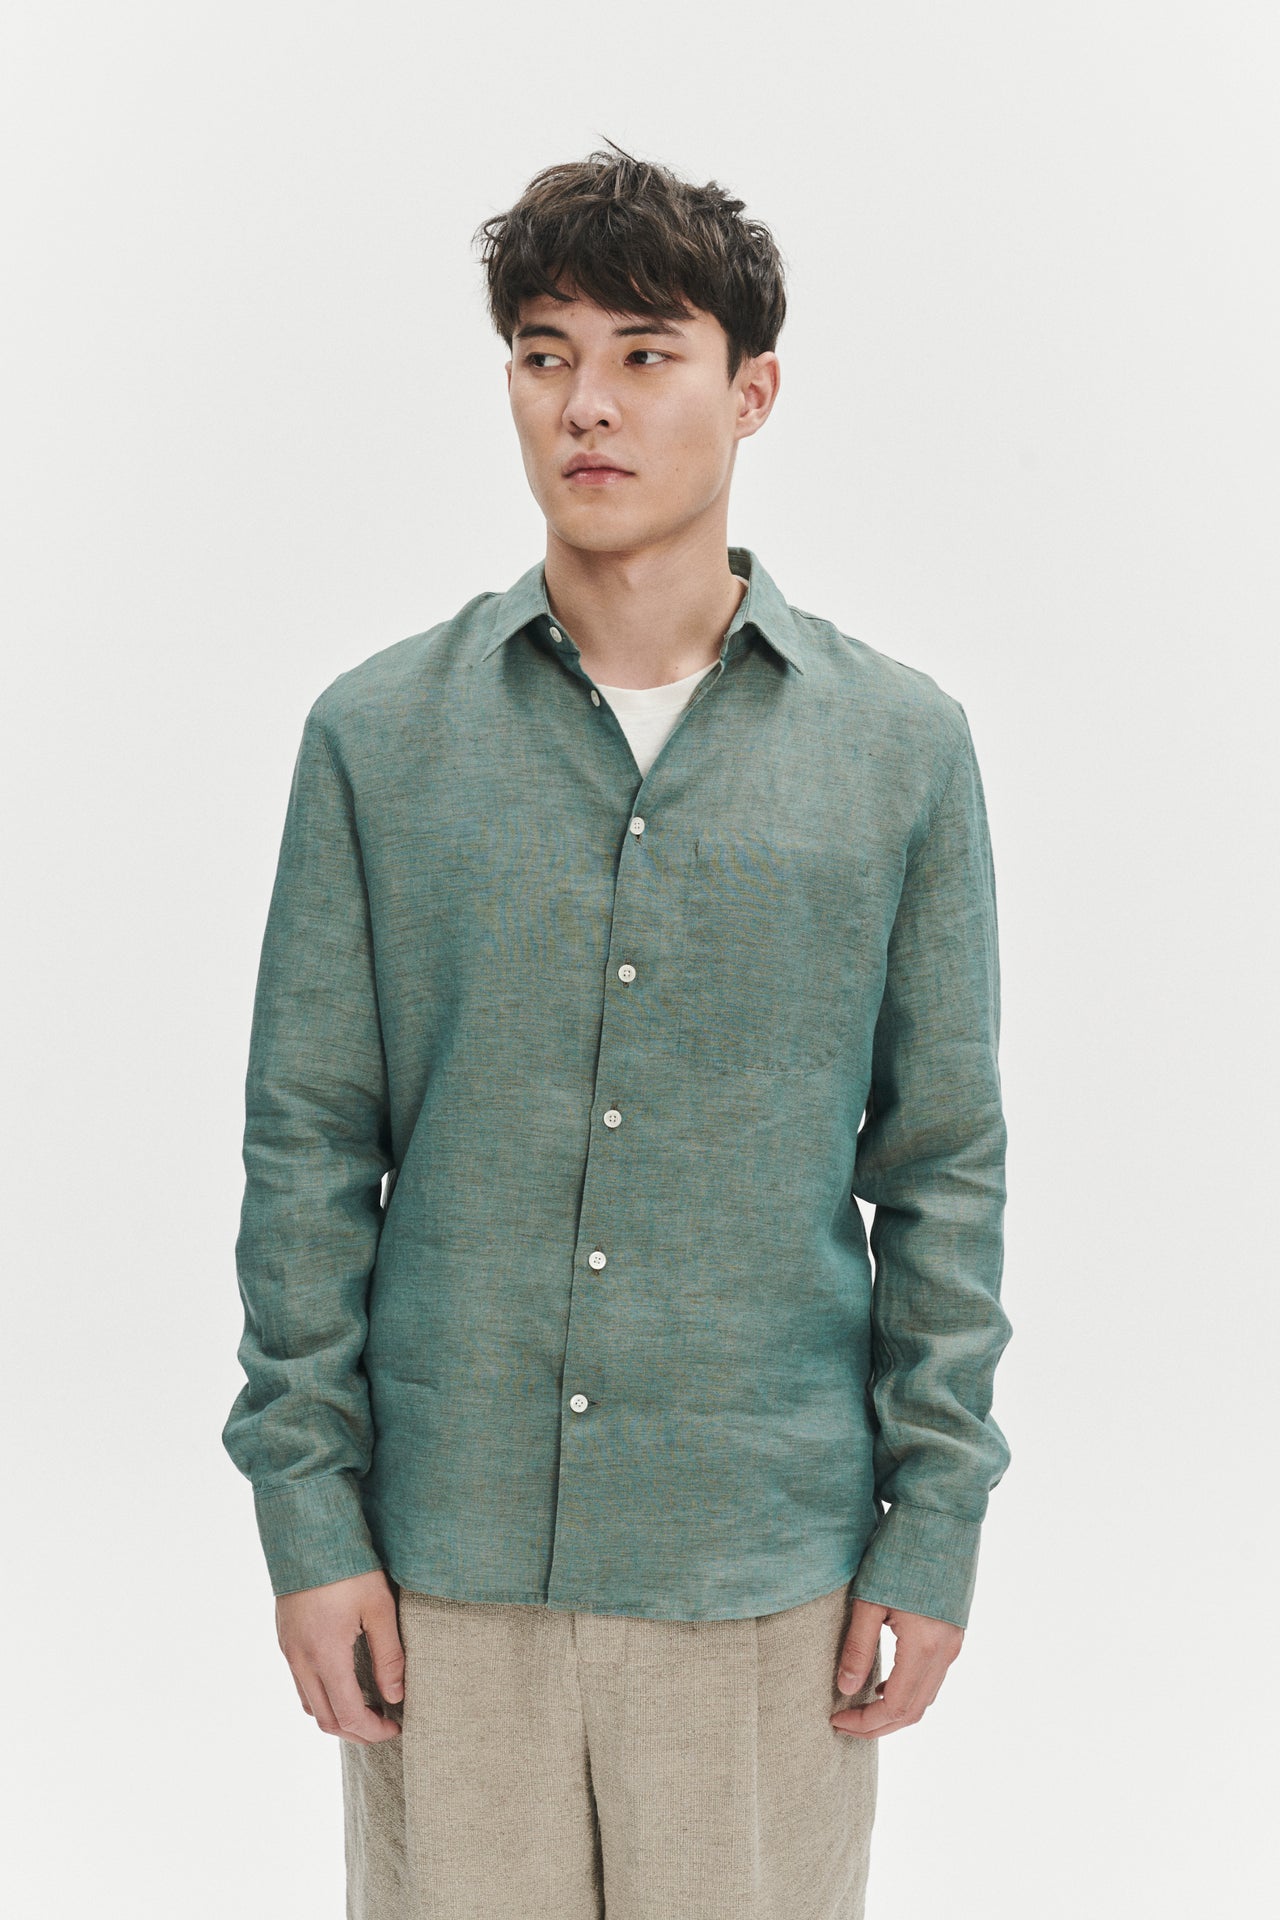 Feel Good Shirt in the Finest Green Delavé Portuguese Linen